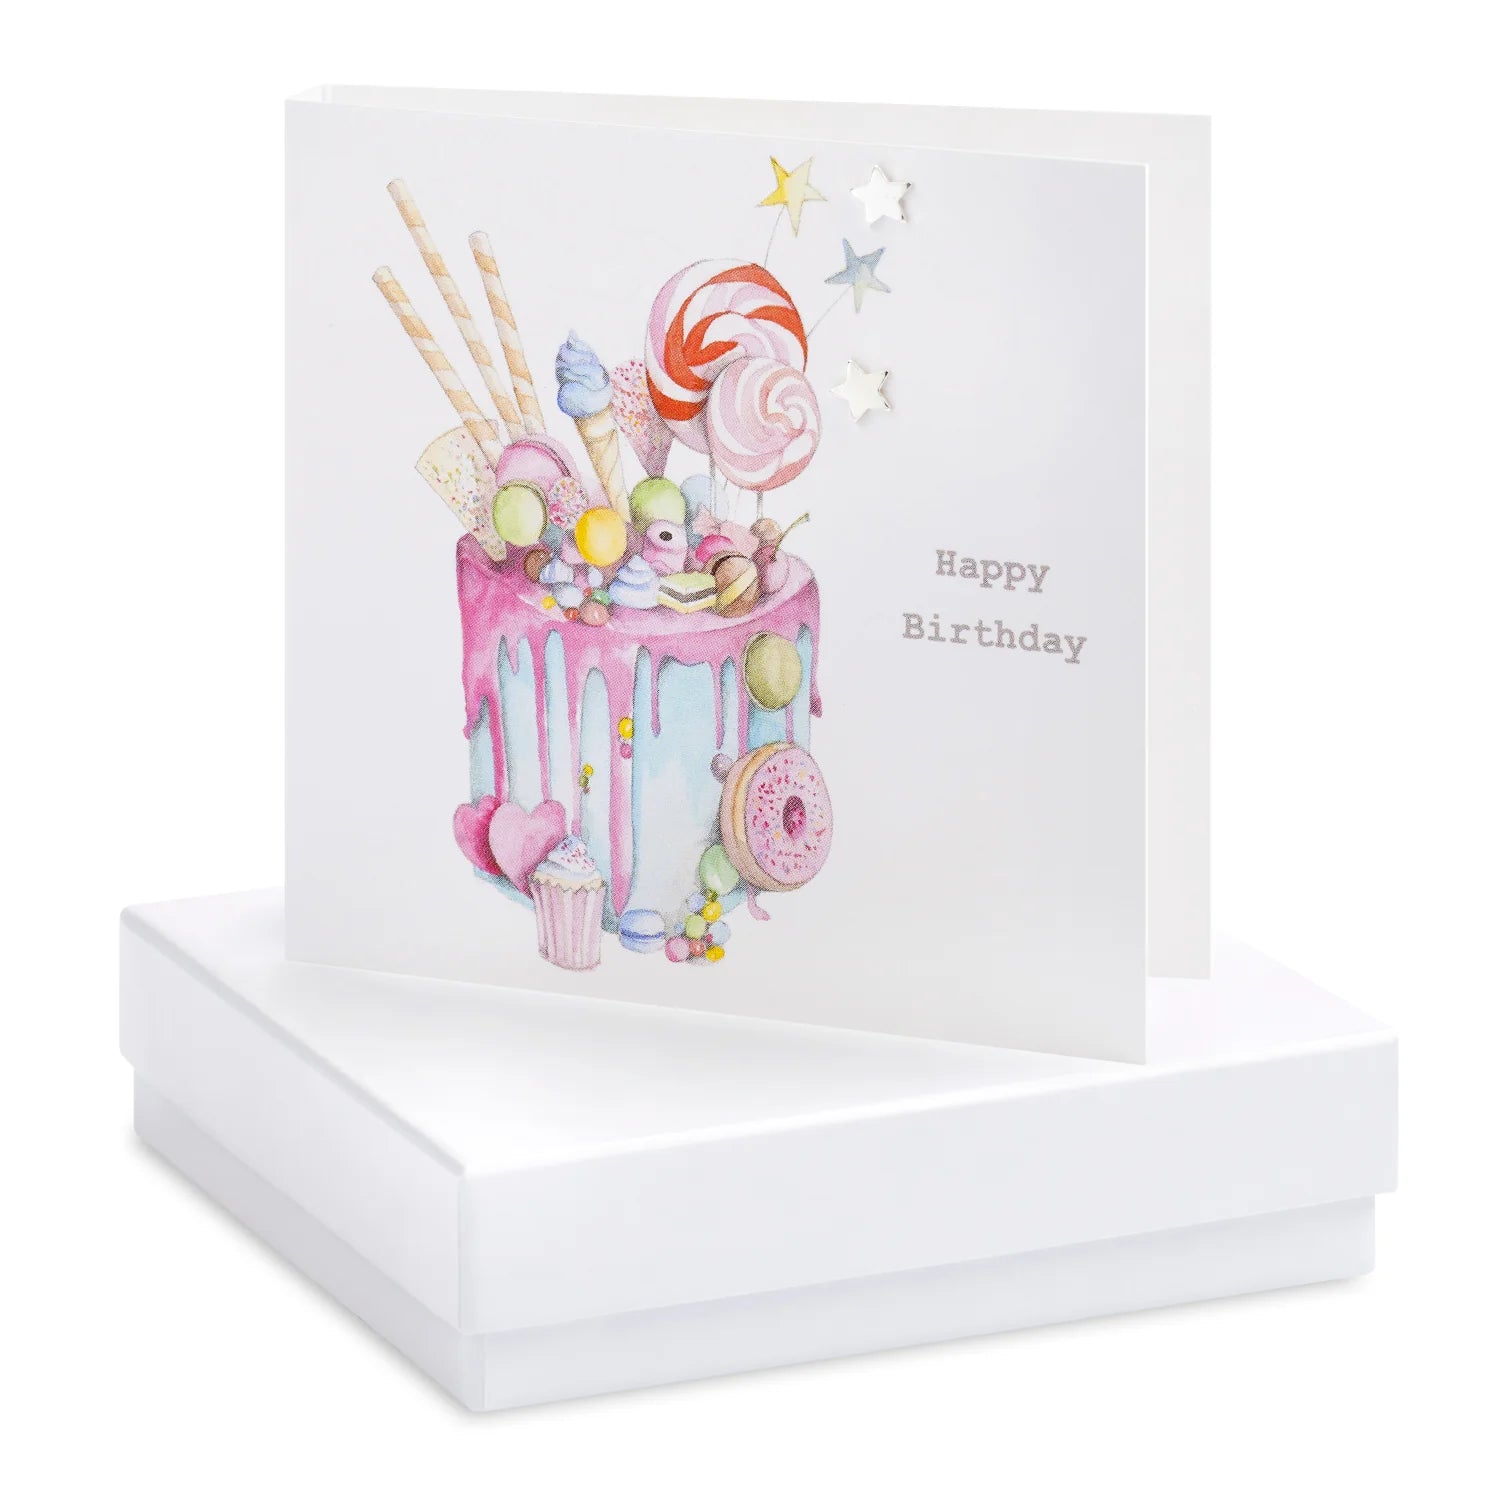 Crumble & Core | Scrumptious Happy Birthday Card with Earrings in a White Box by Weirs of Baggot St